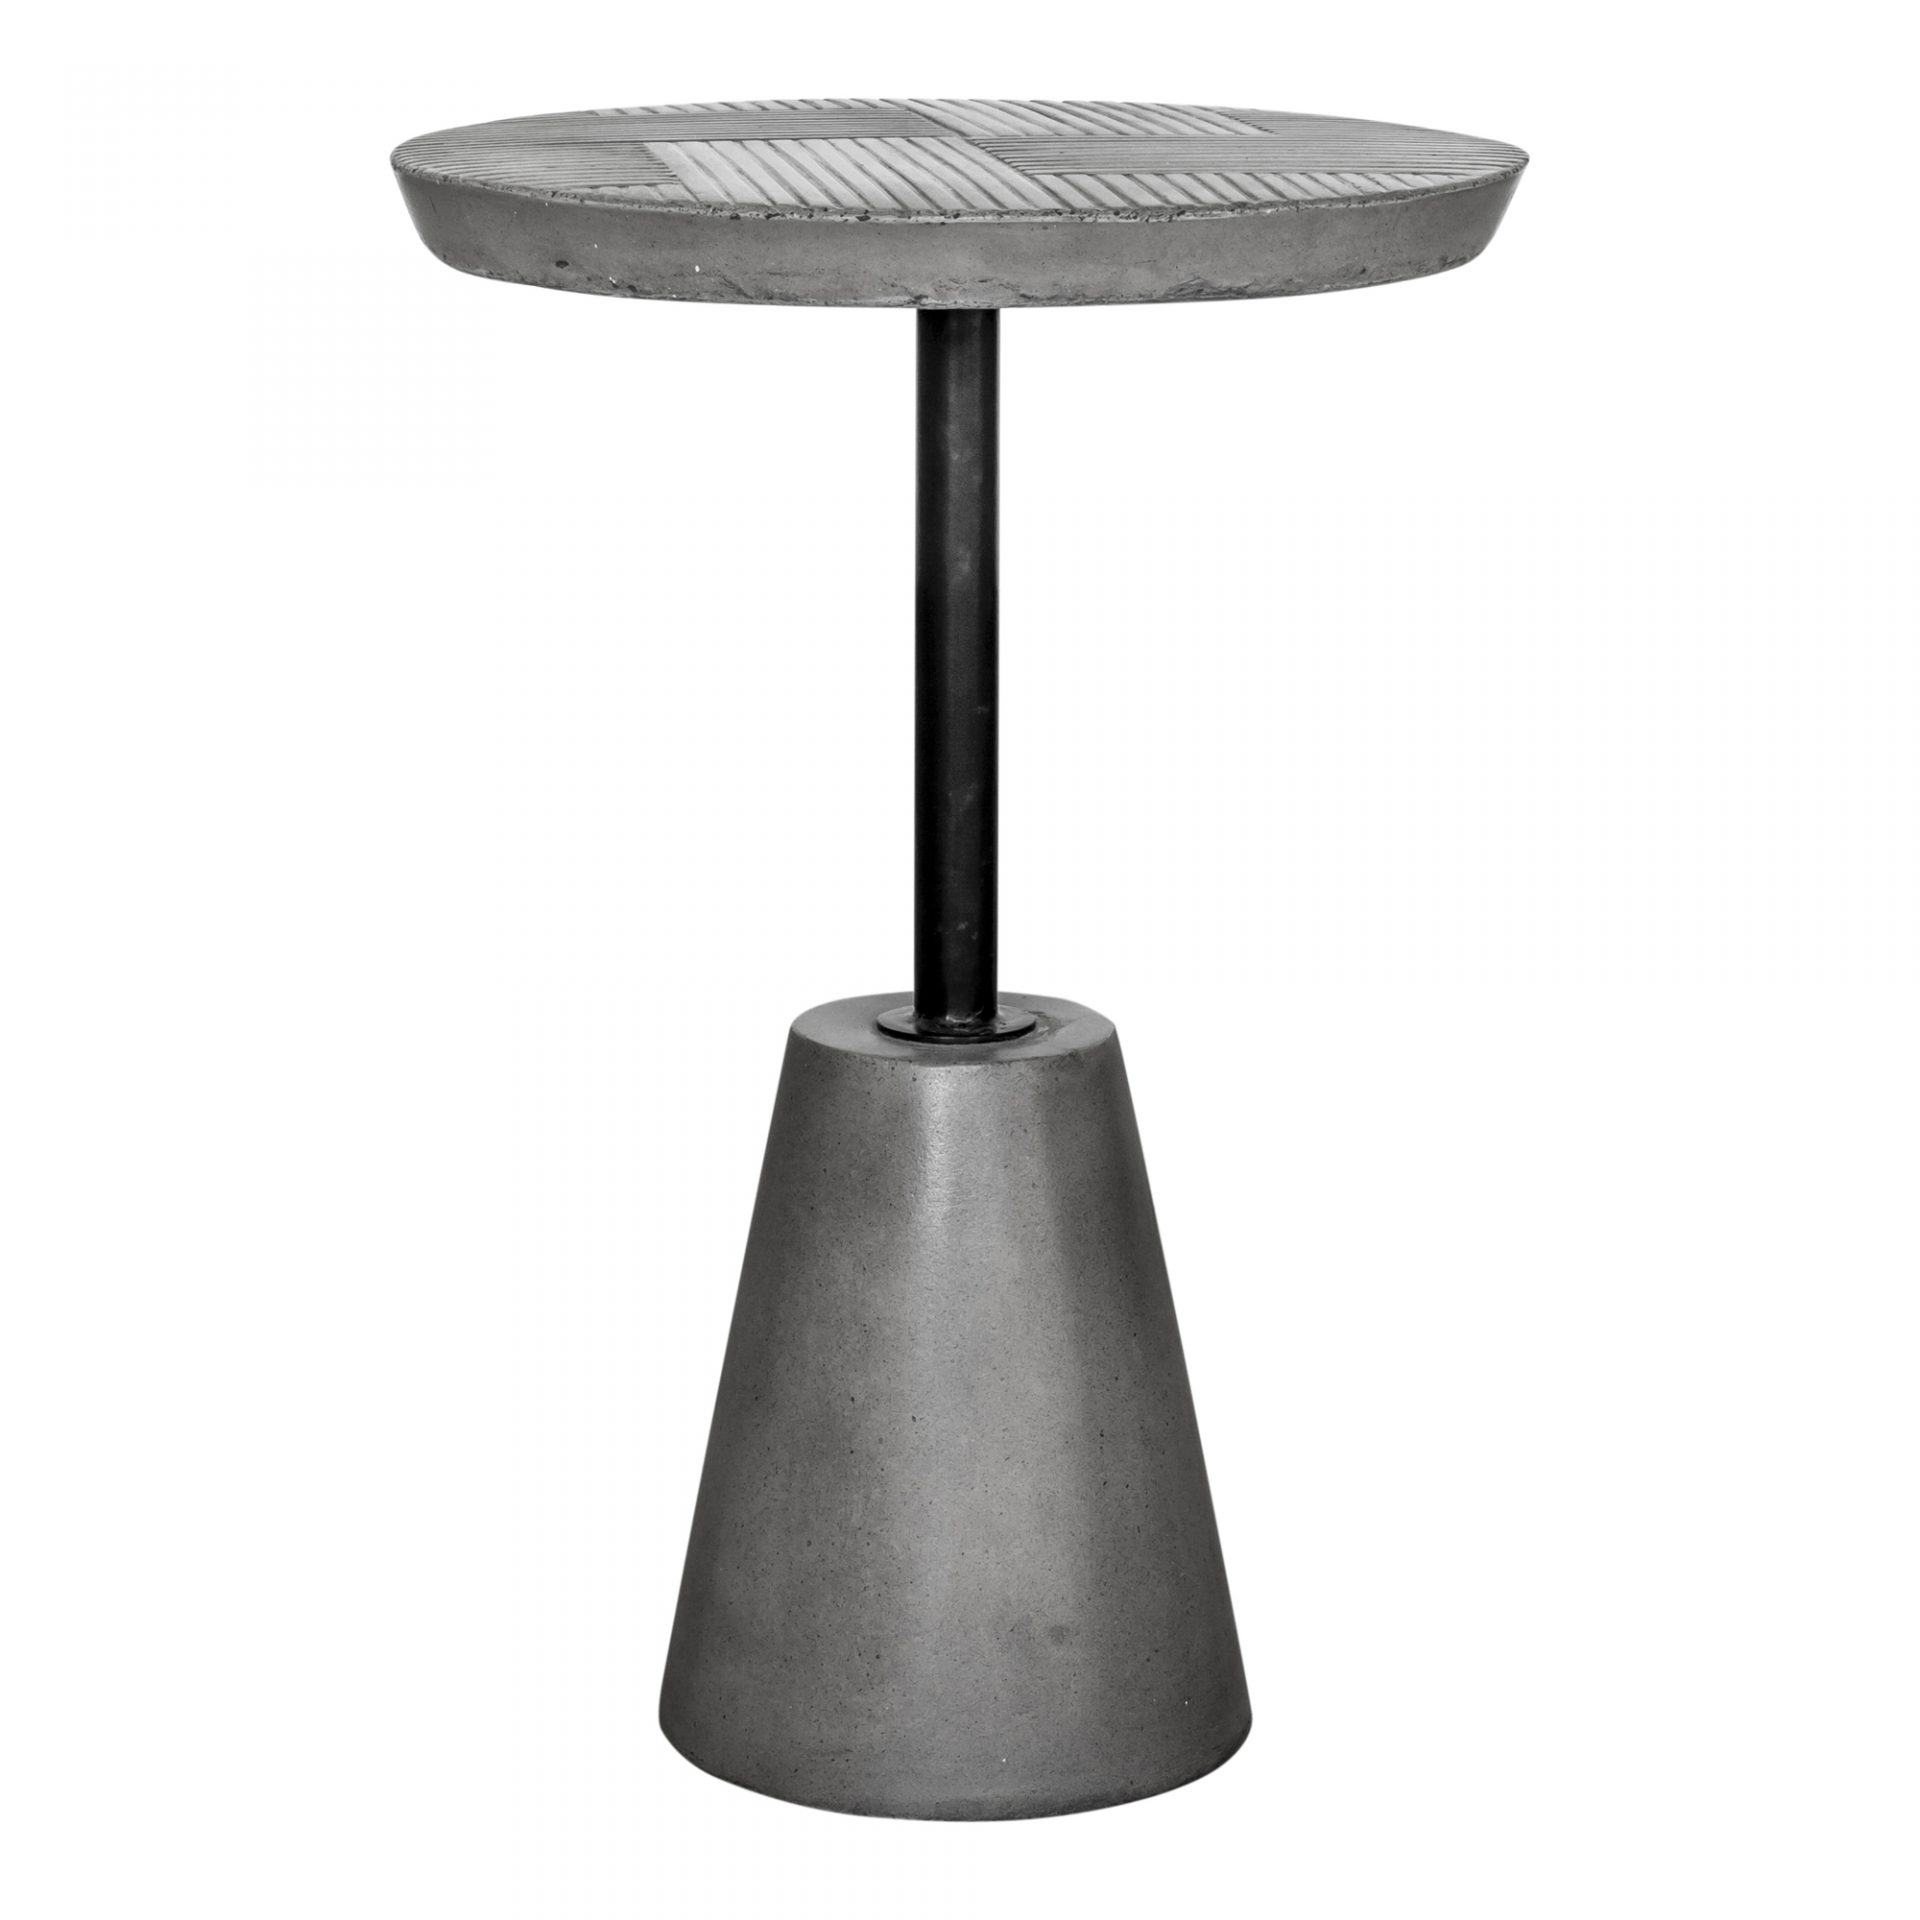 Mitchell_Table_grey